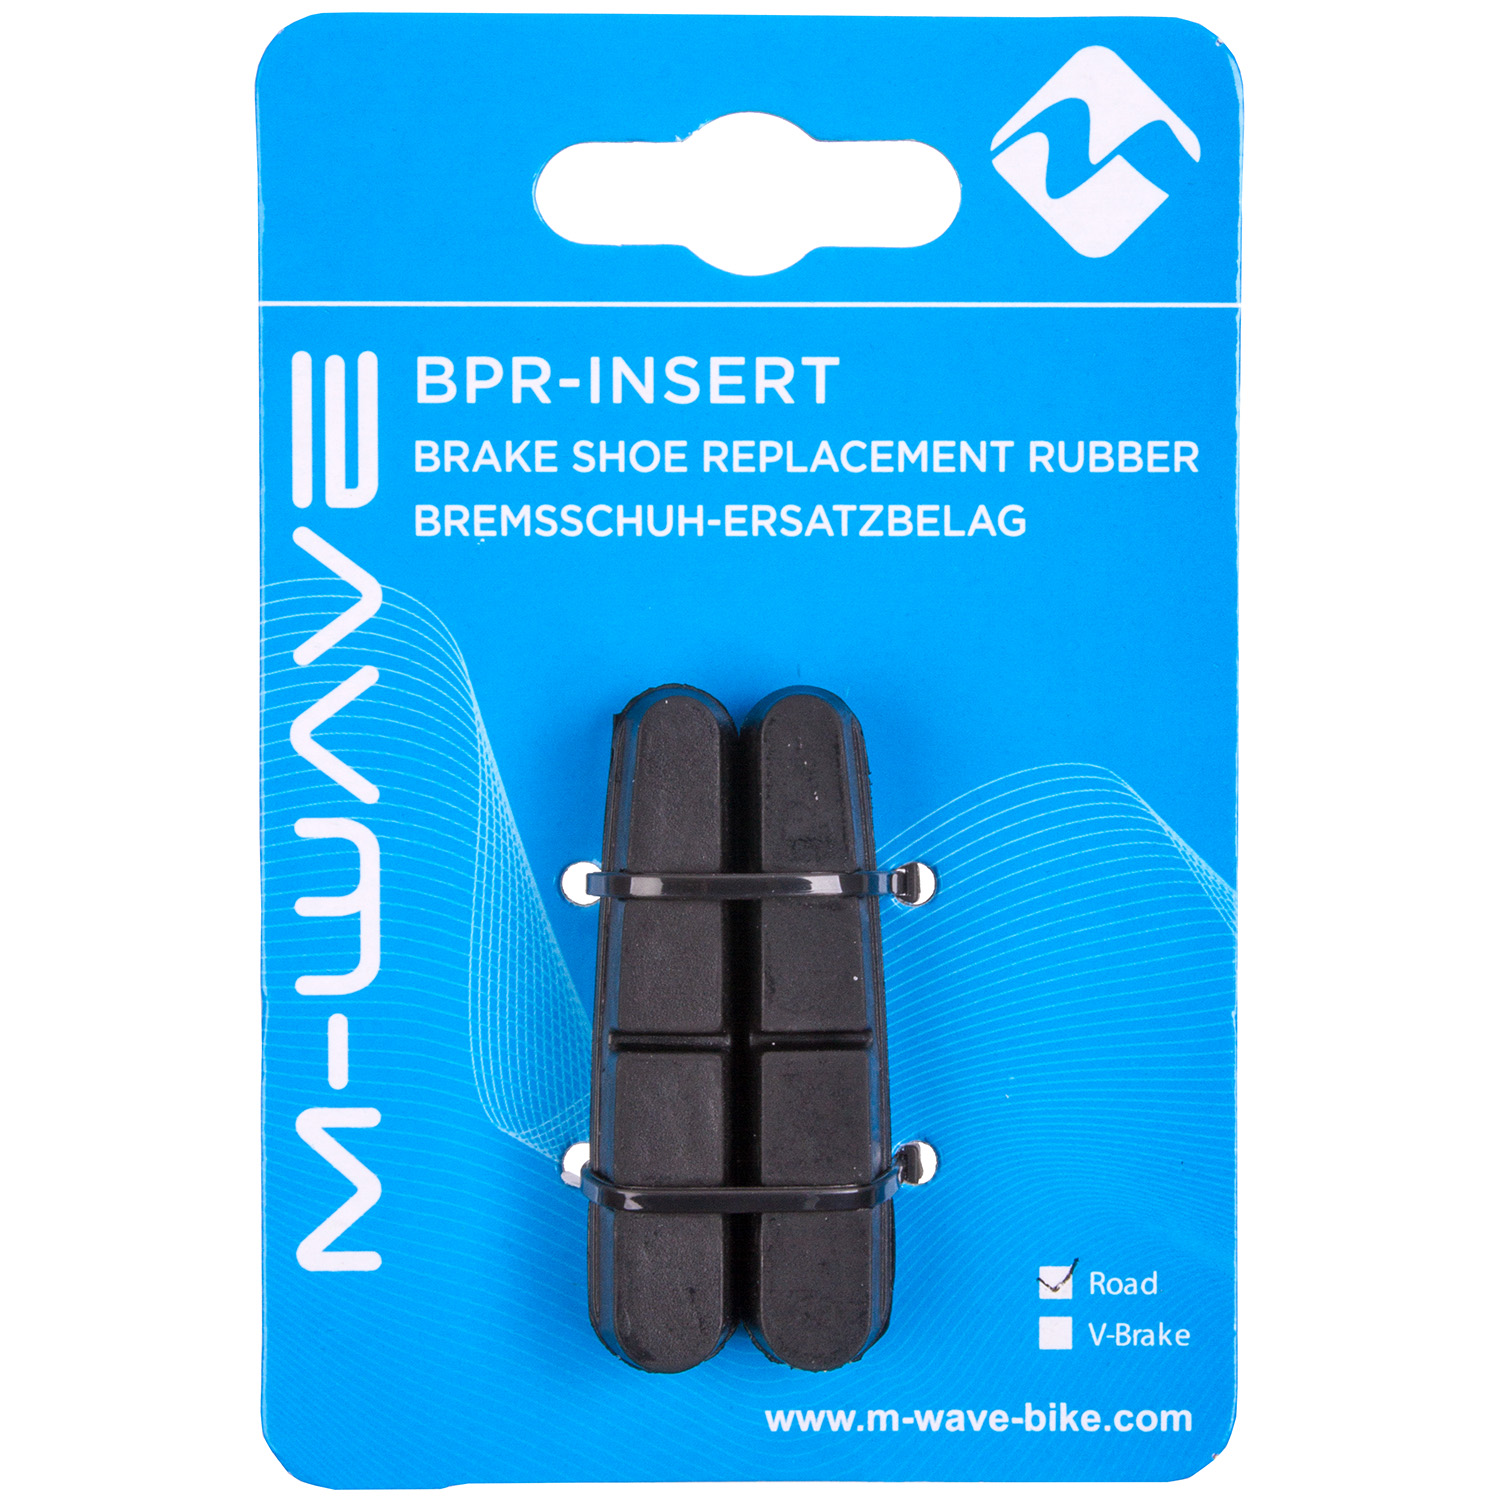 361772 – M-WAVE BPR-Insert-RR brake shoe replacement rubber – AVAILABLE IN SELECTED BIKE SHOPS